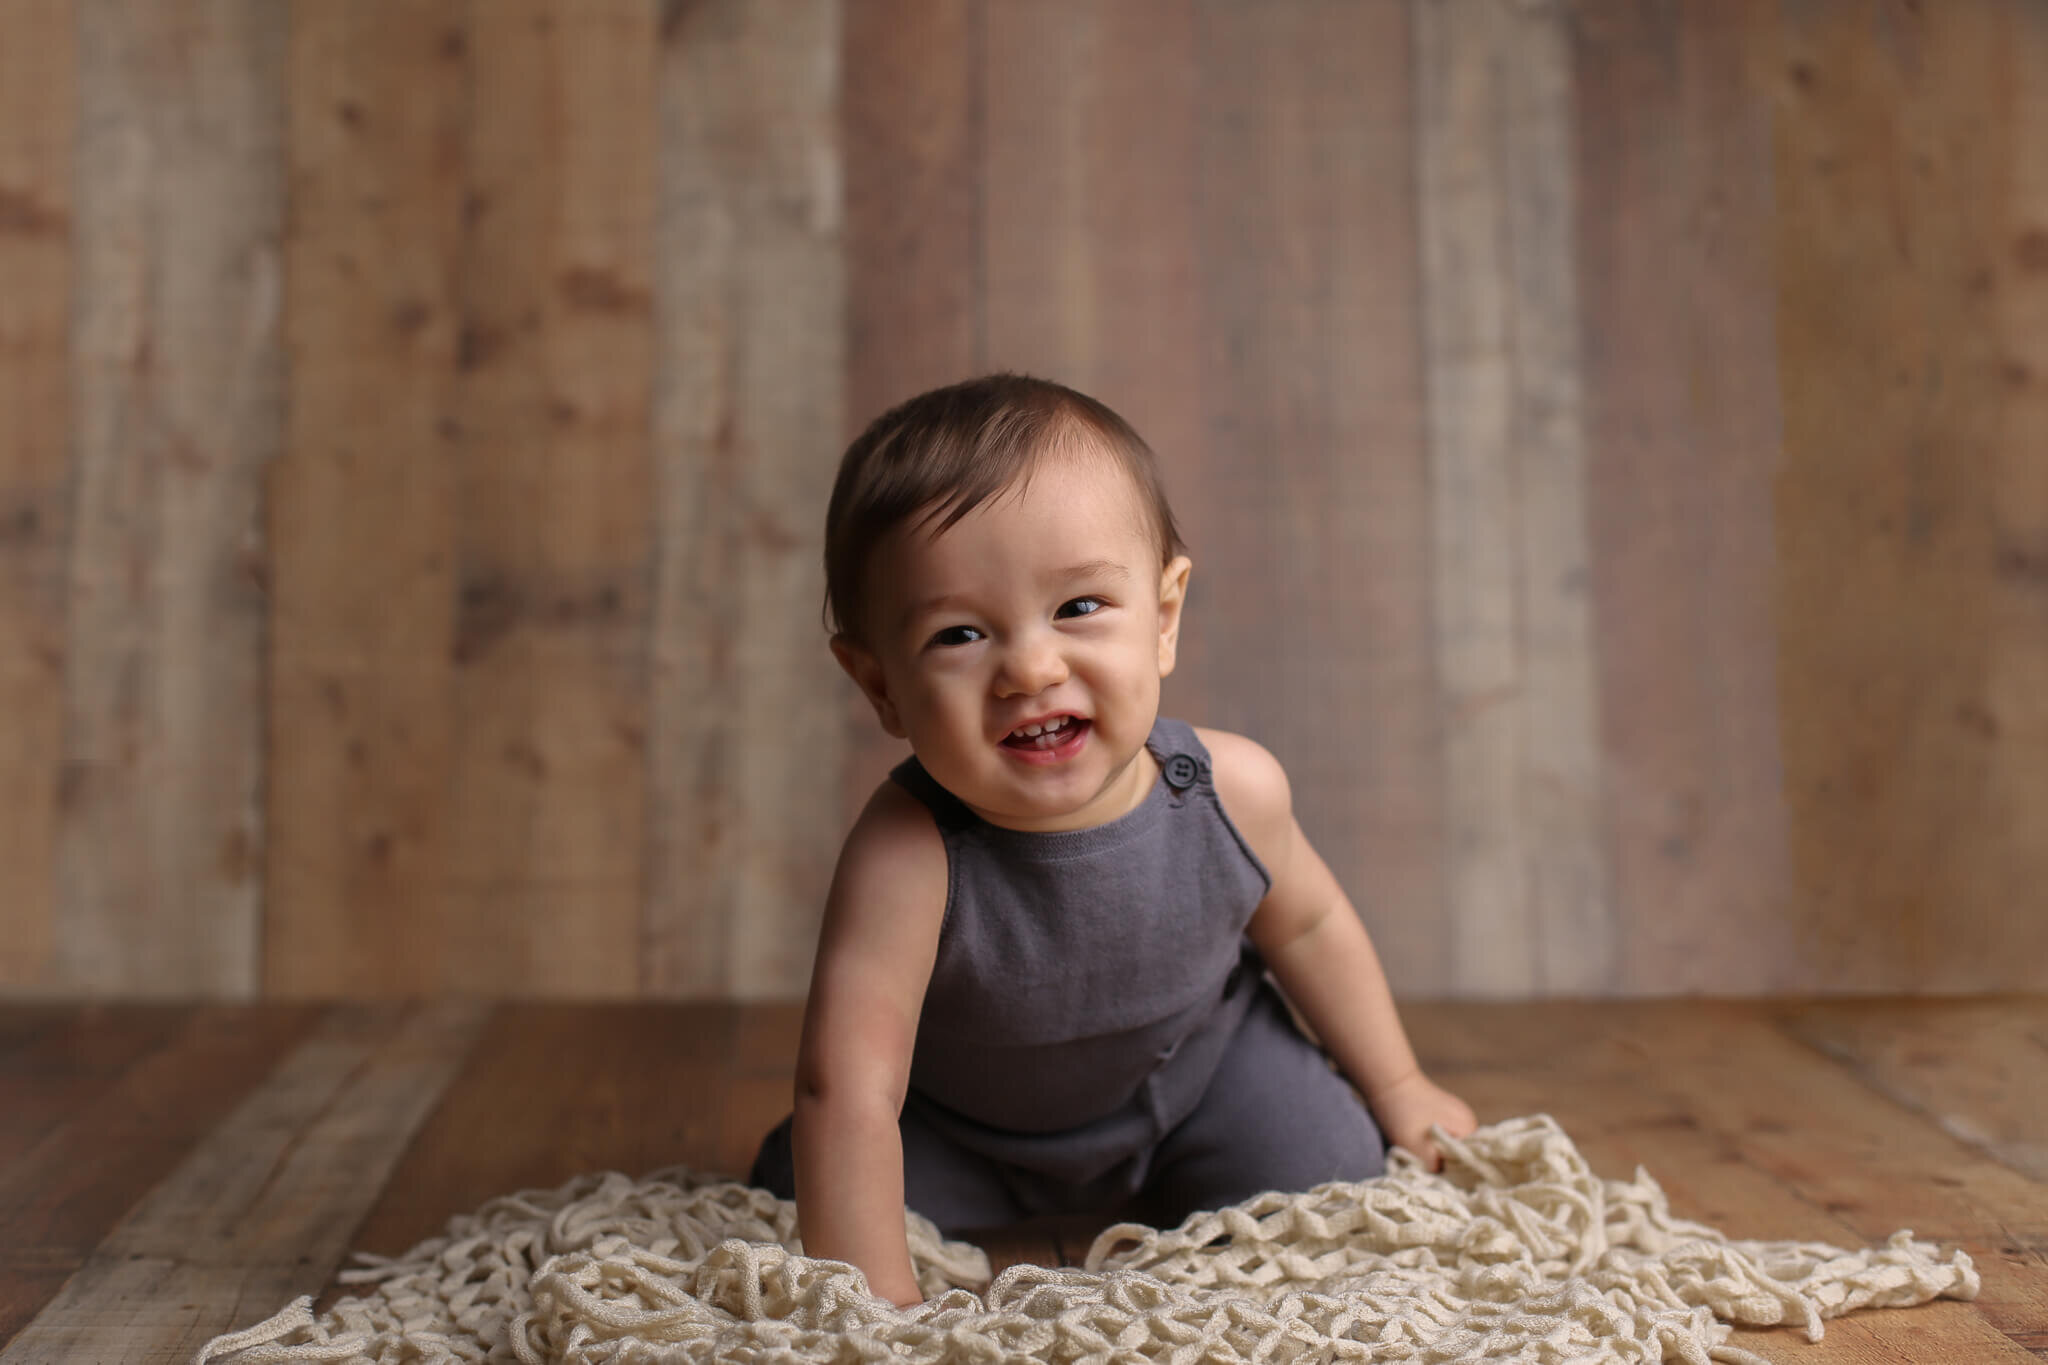  A photograph of a baby boy on his knees in a little jumpsuit, leaning forward and smiling playfully, showing his cute teeth as he celebrates a milestone by Photography by L Rose, a baby photographer in San Diego California 